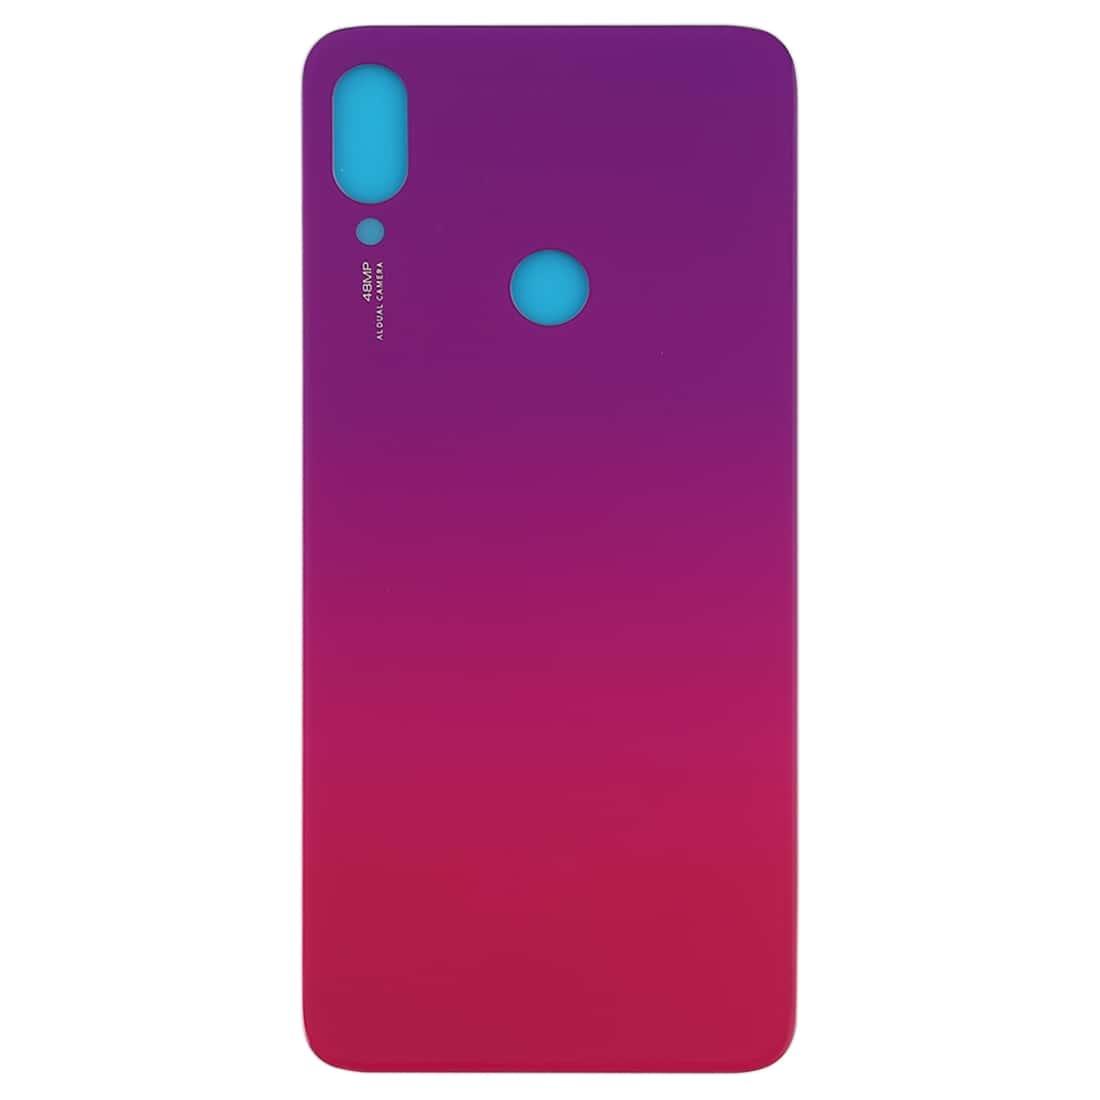 Back Glass Panel for  Xiaomi Redmi Note 7 Red